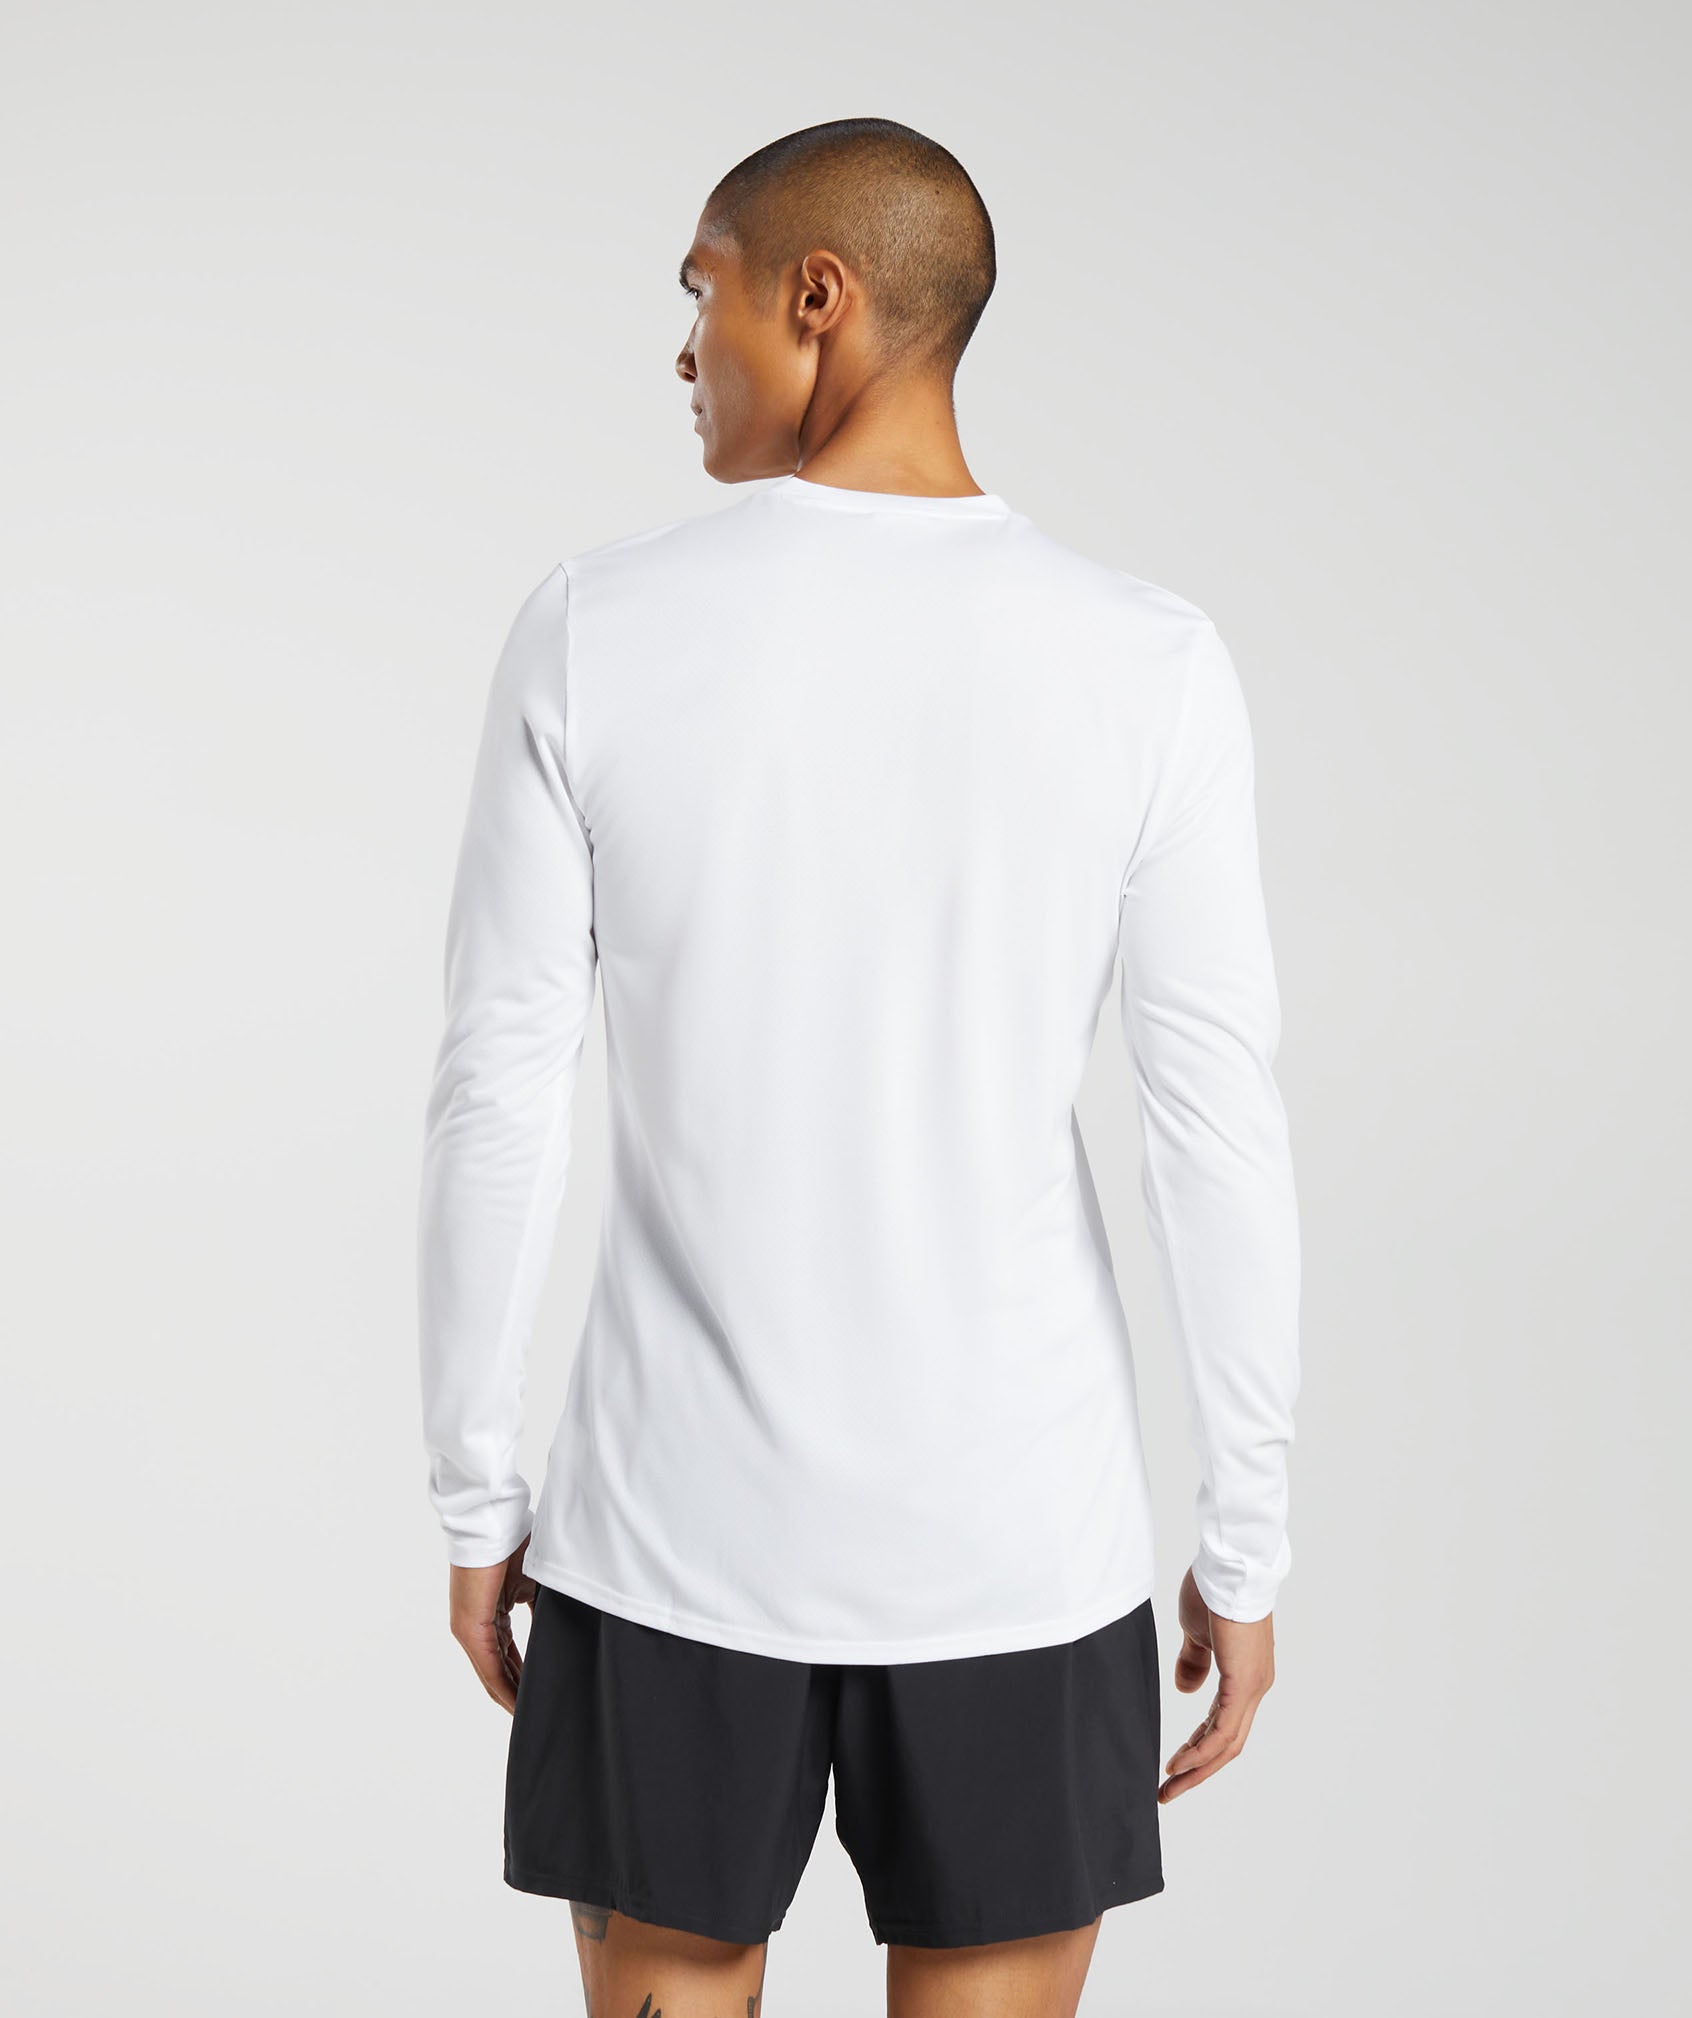 Arrival Long Sleeve T-Shirt in White - view 2